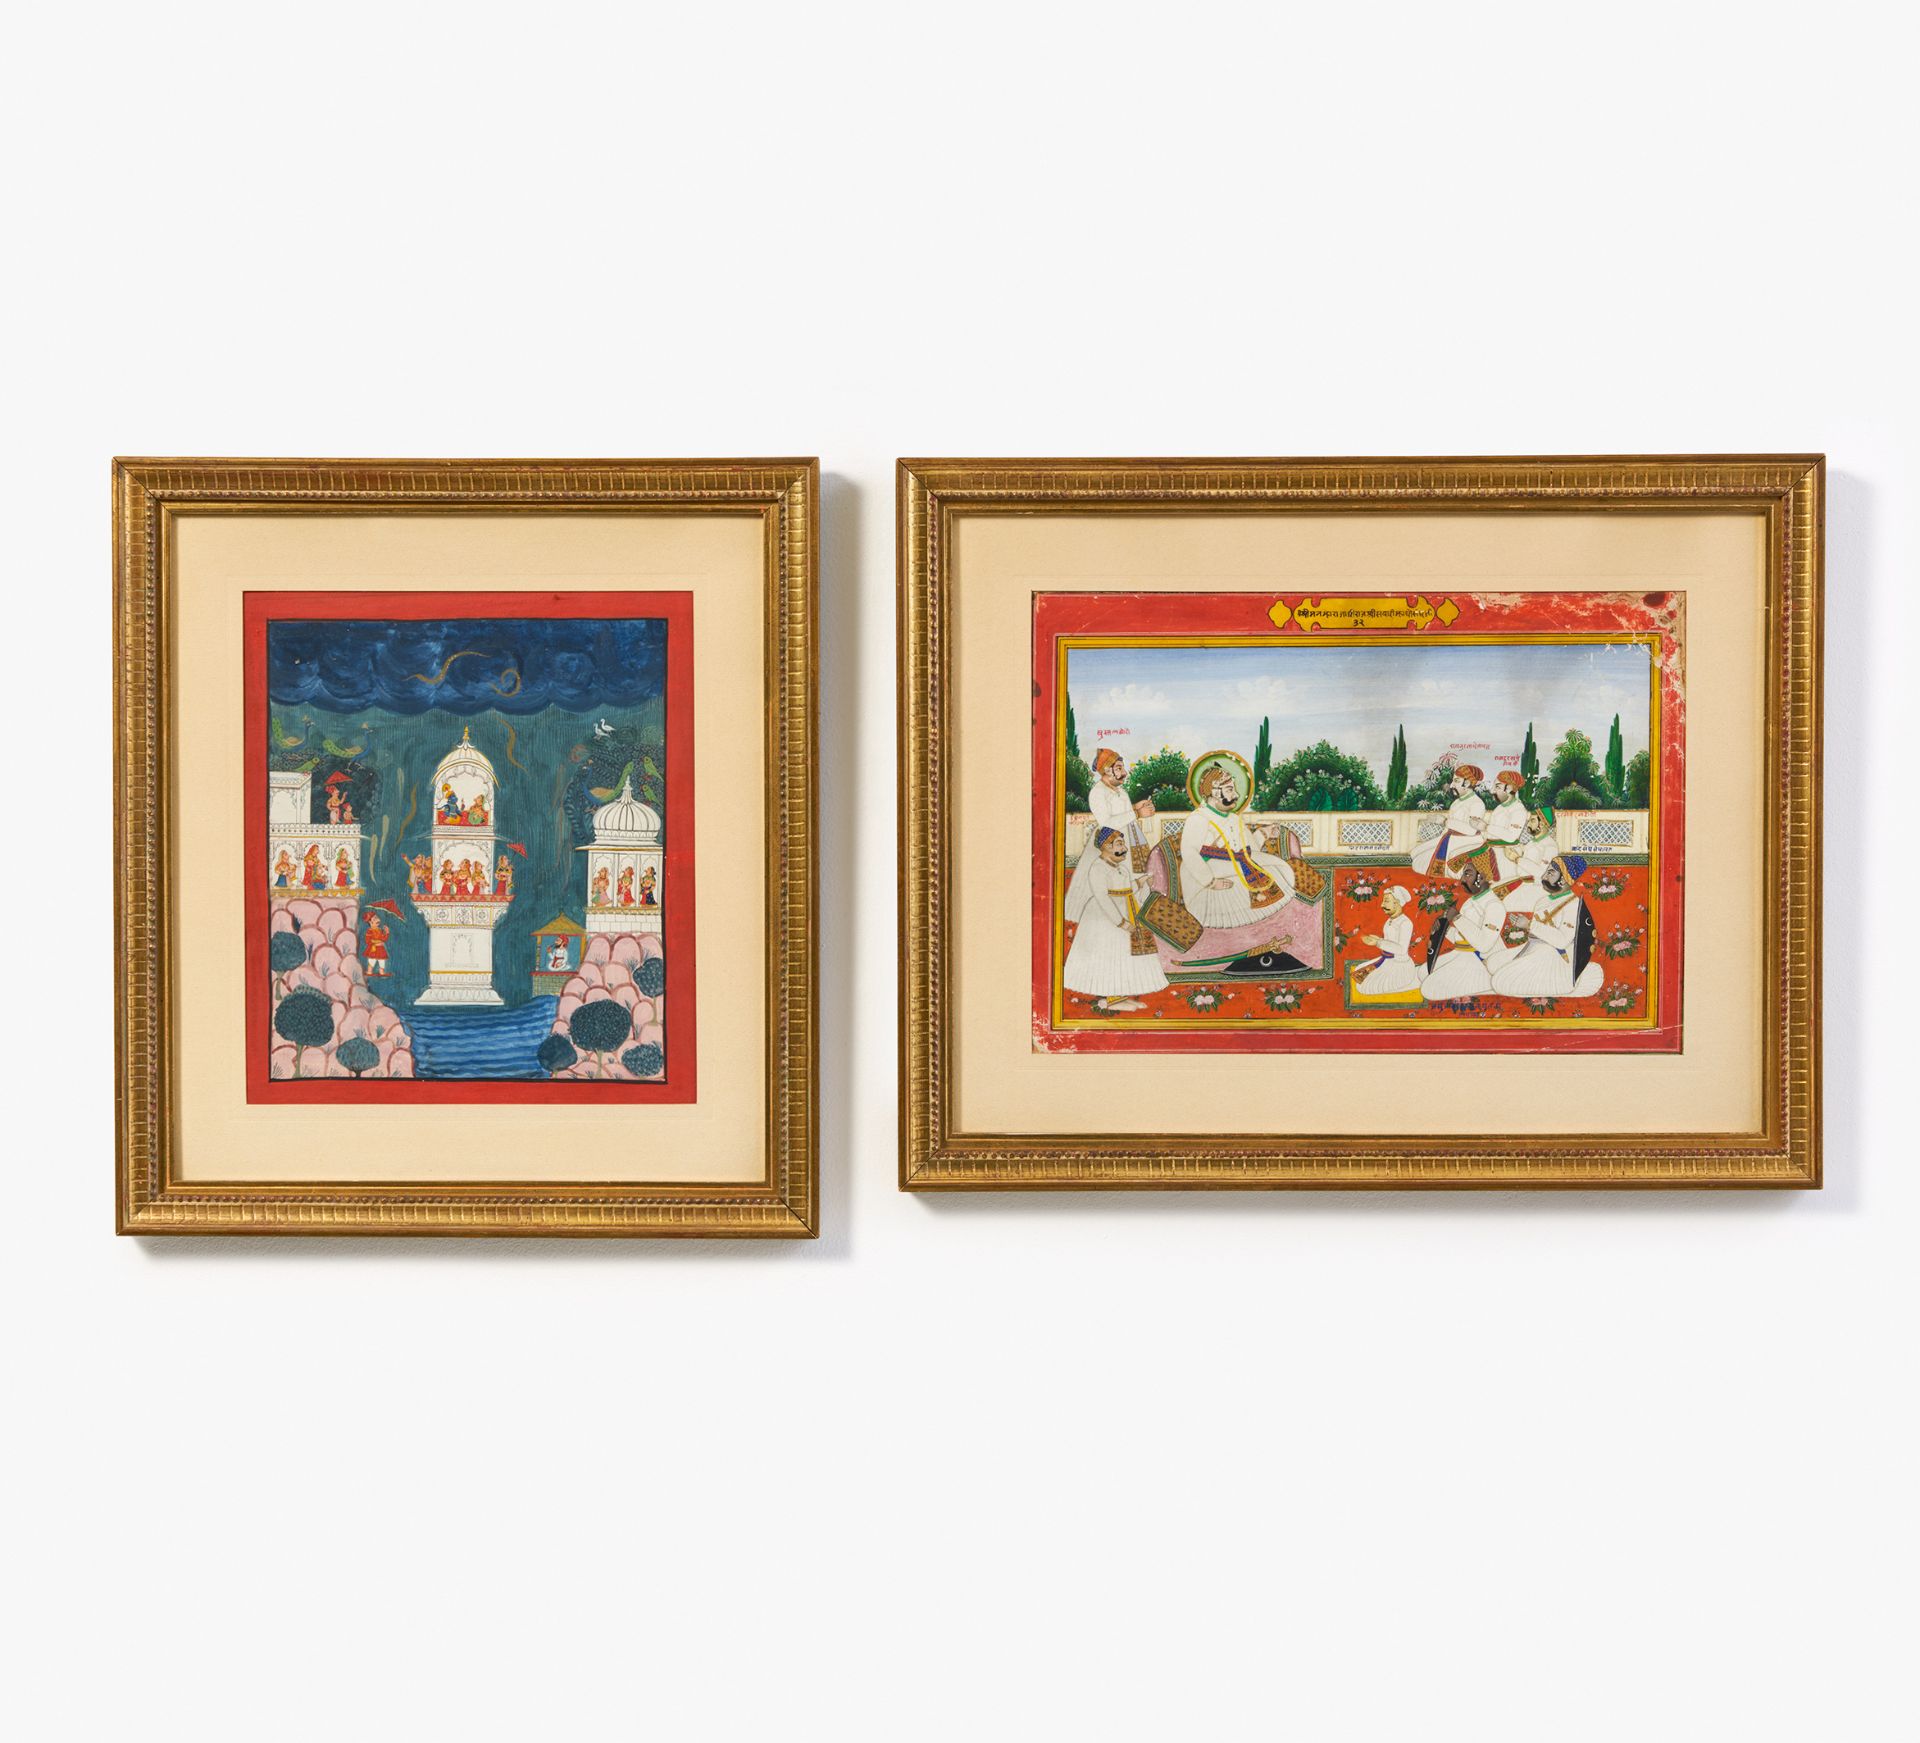 TWO PAINTING WITH MAHARADJA AND KRISHNA. Mughal India. 18th-19th c. Fine painting. Pigments and gold